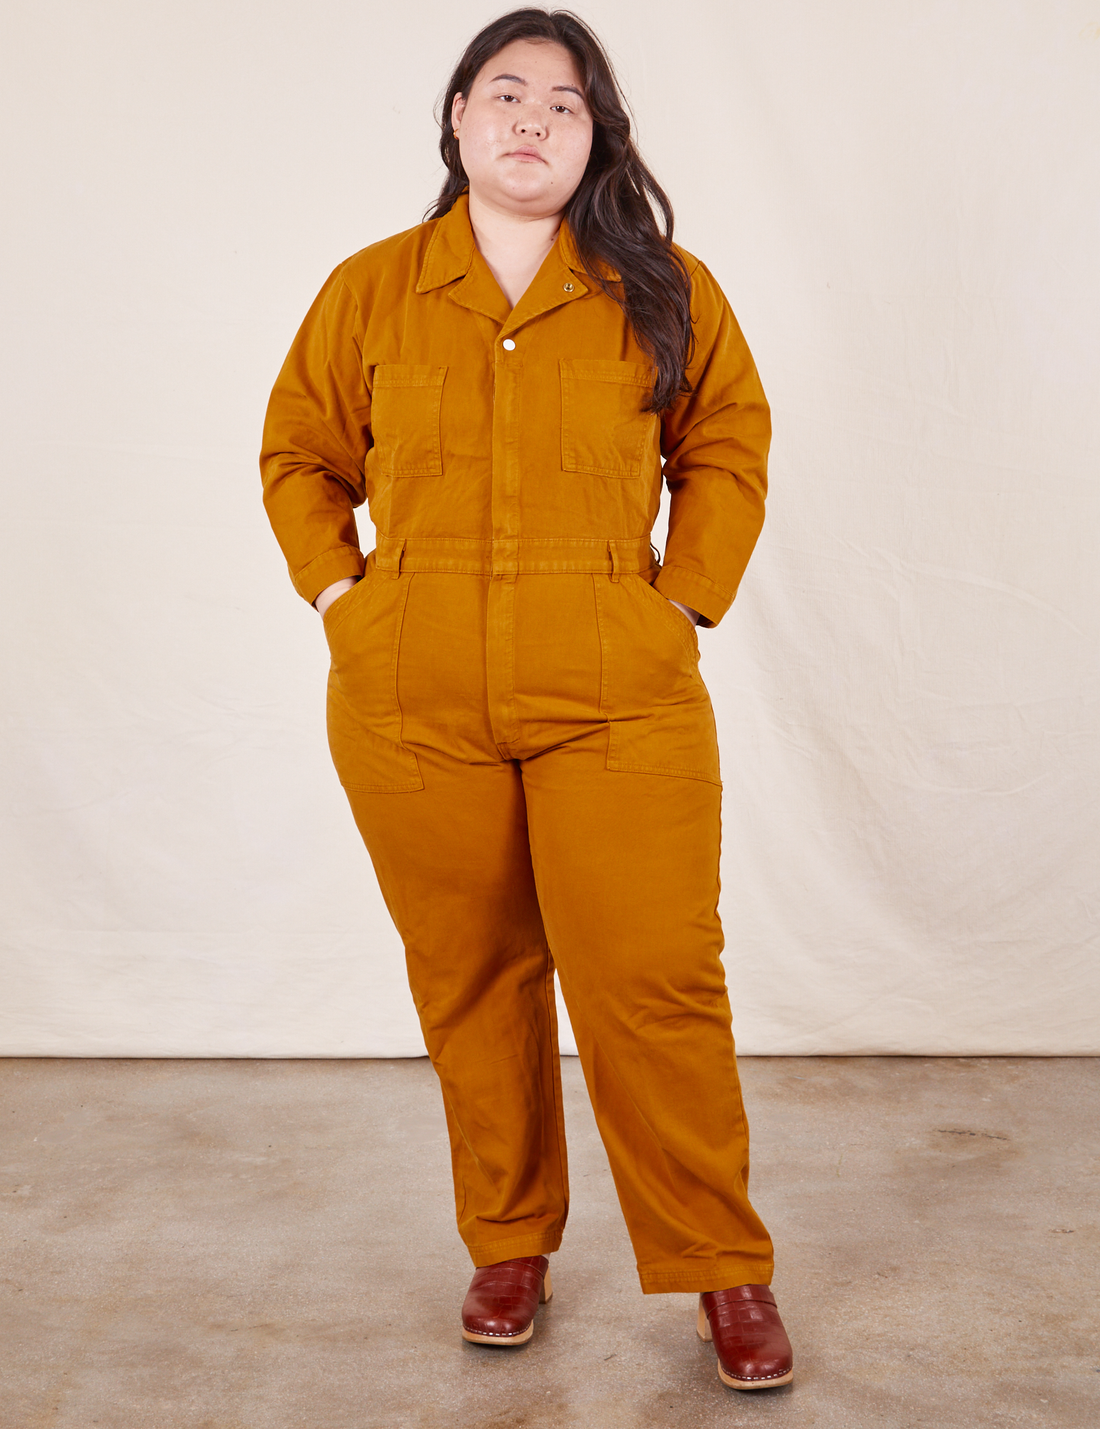 Everyday Jumpsuit in Spicy Mustard on Ashley